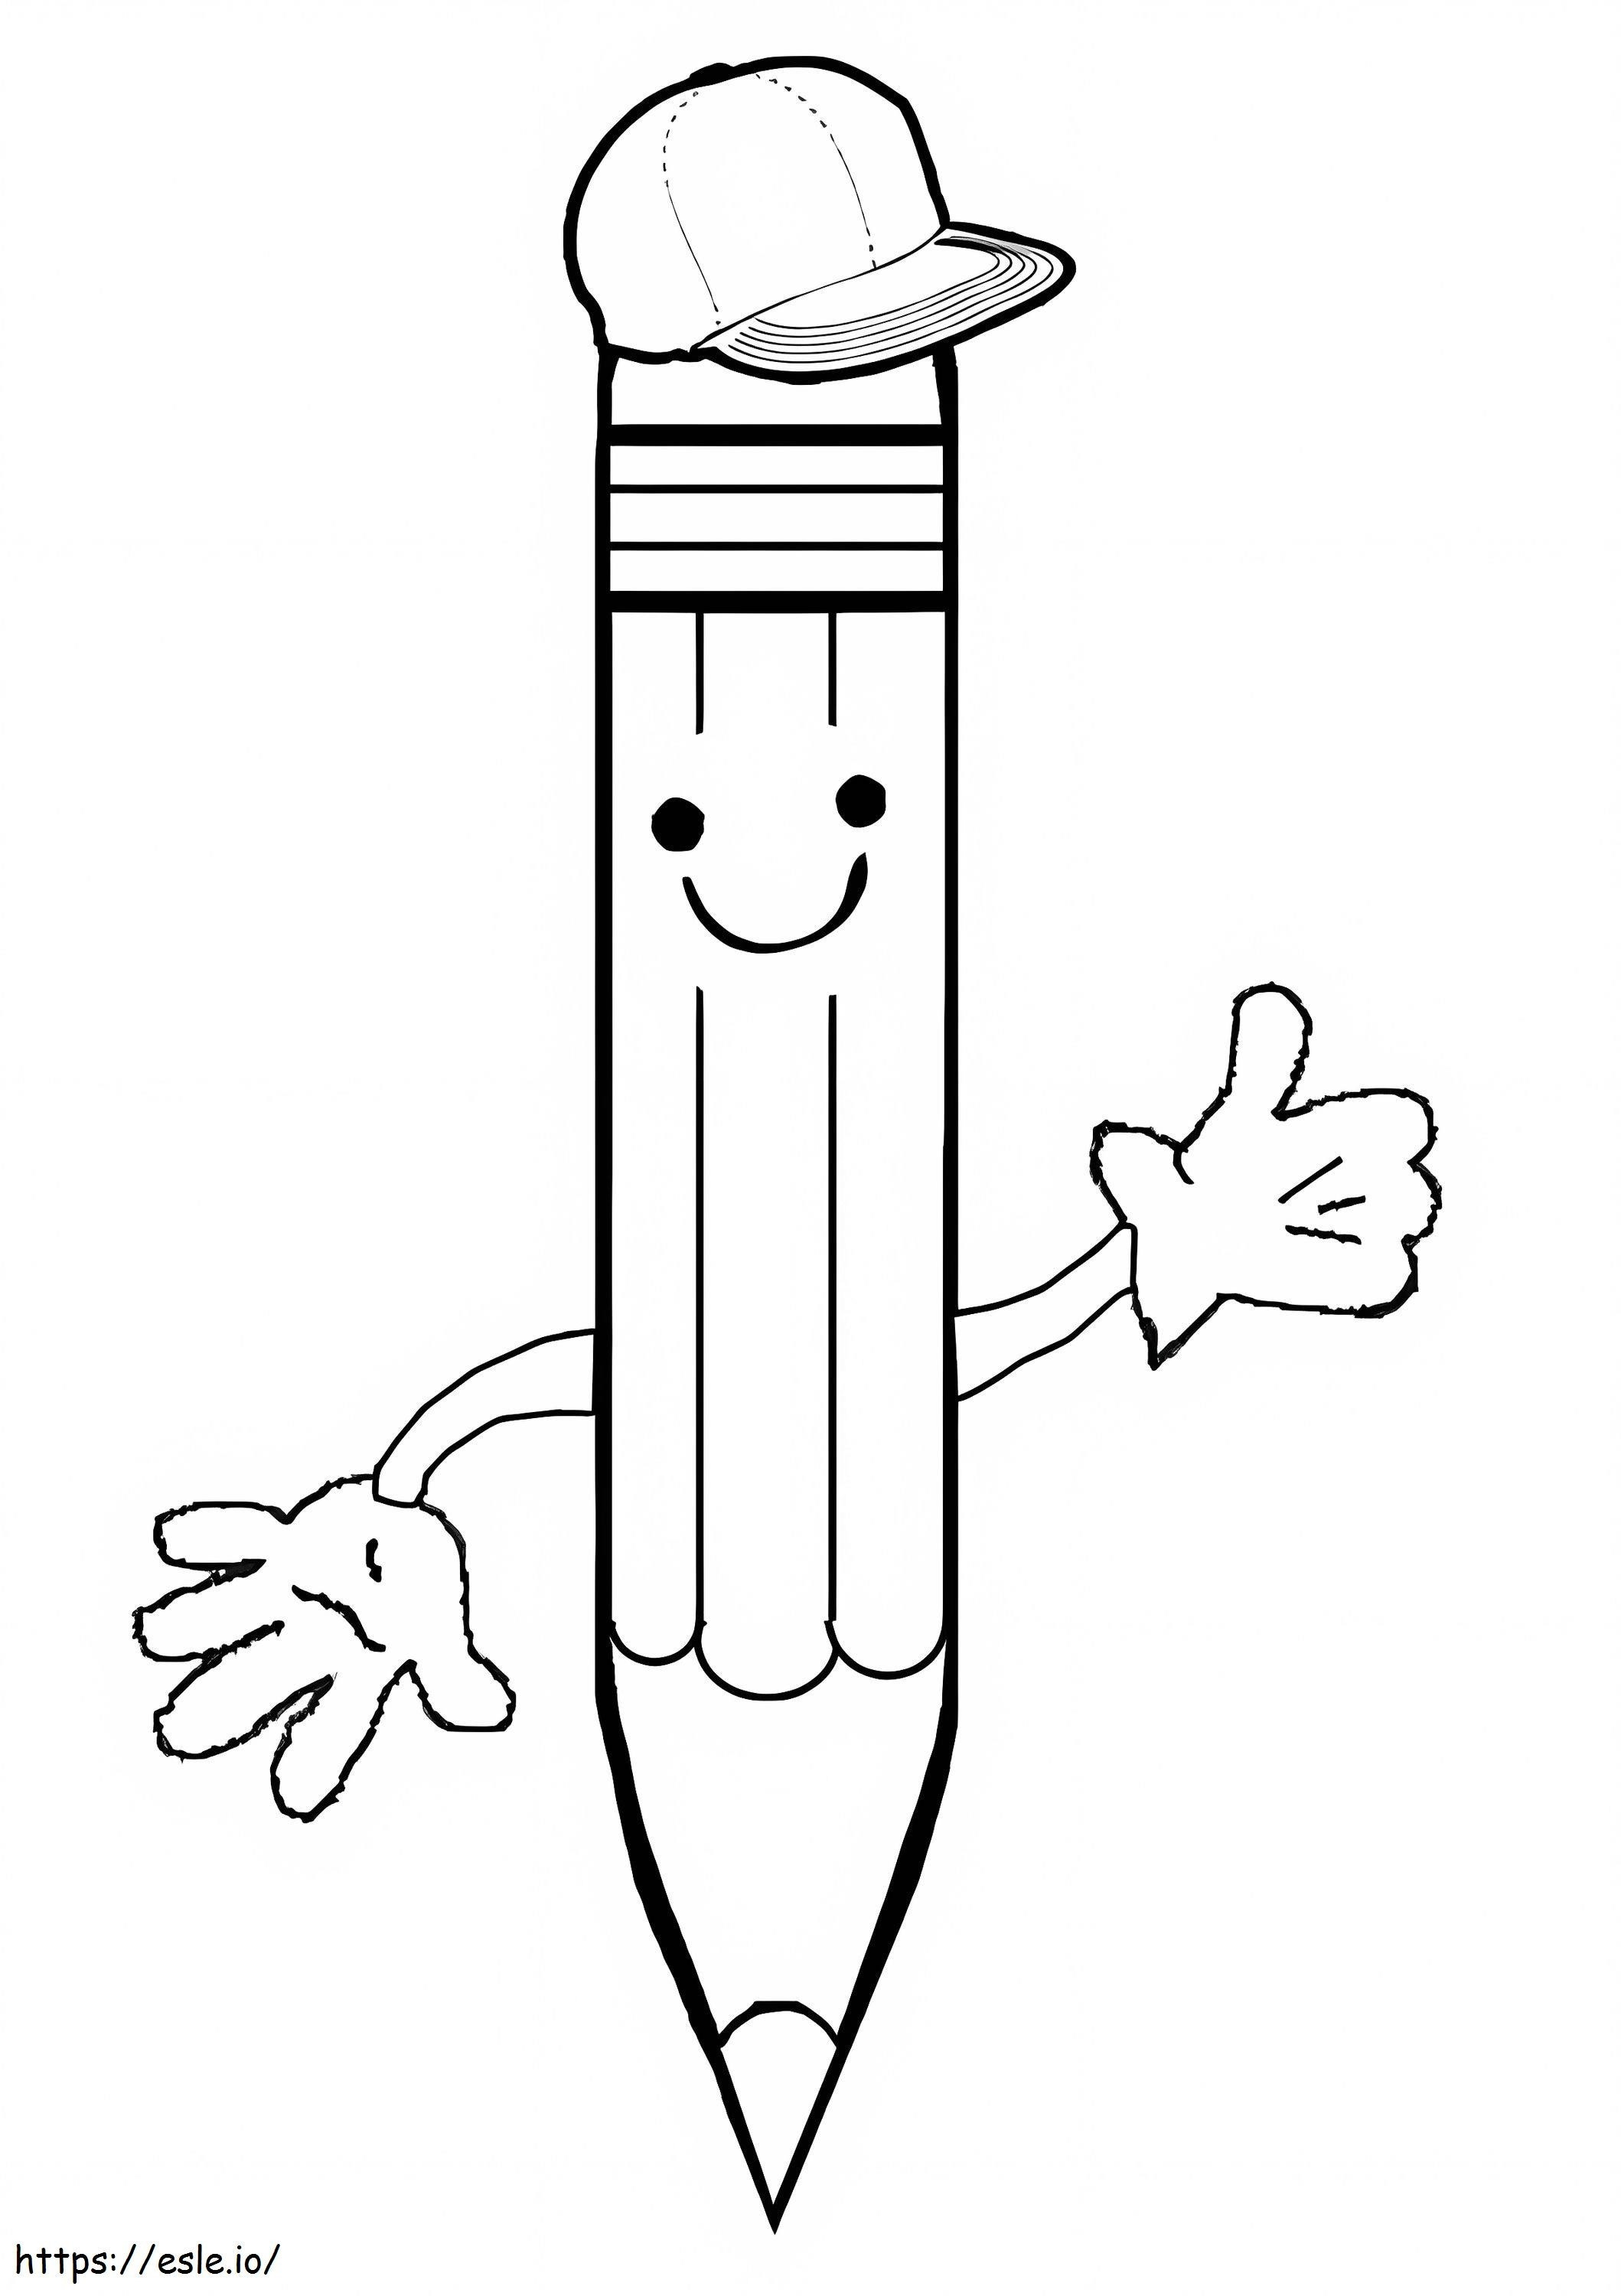 Smiling Pencil With Cap coloring page